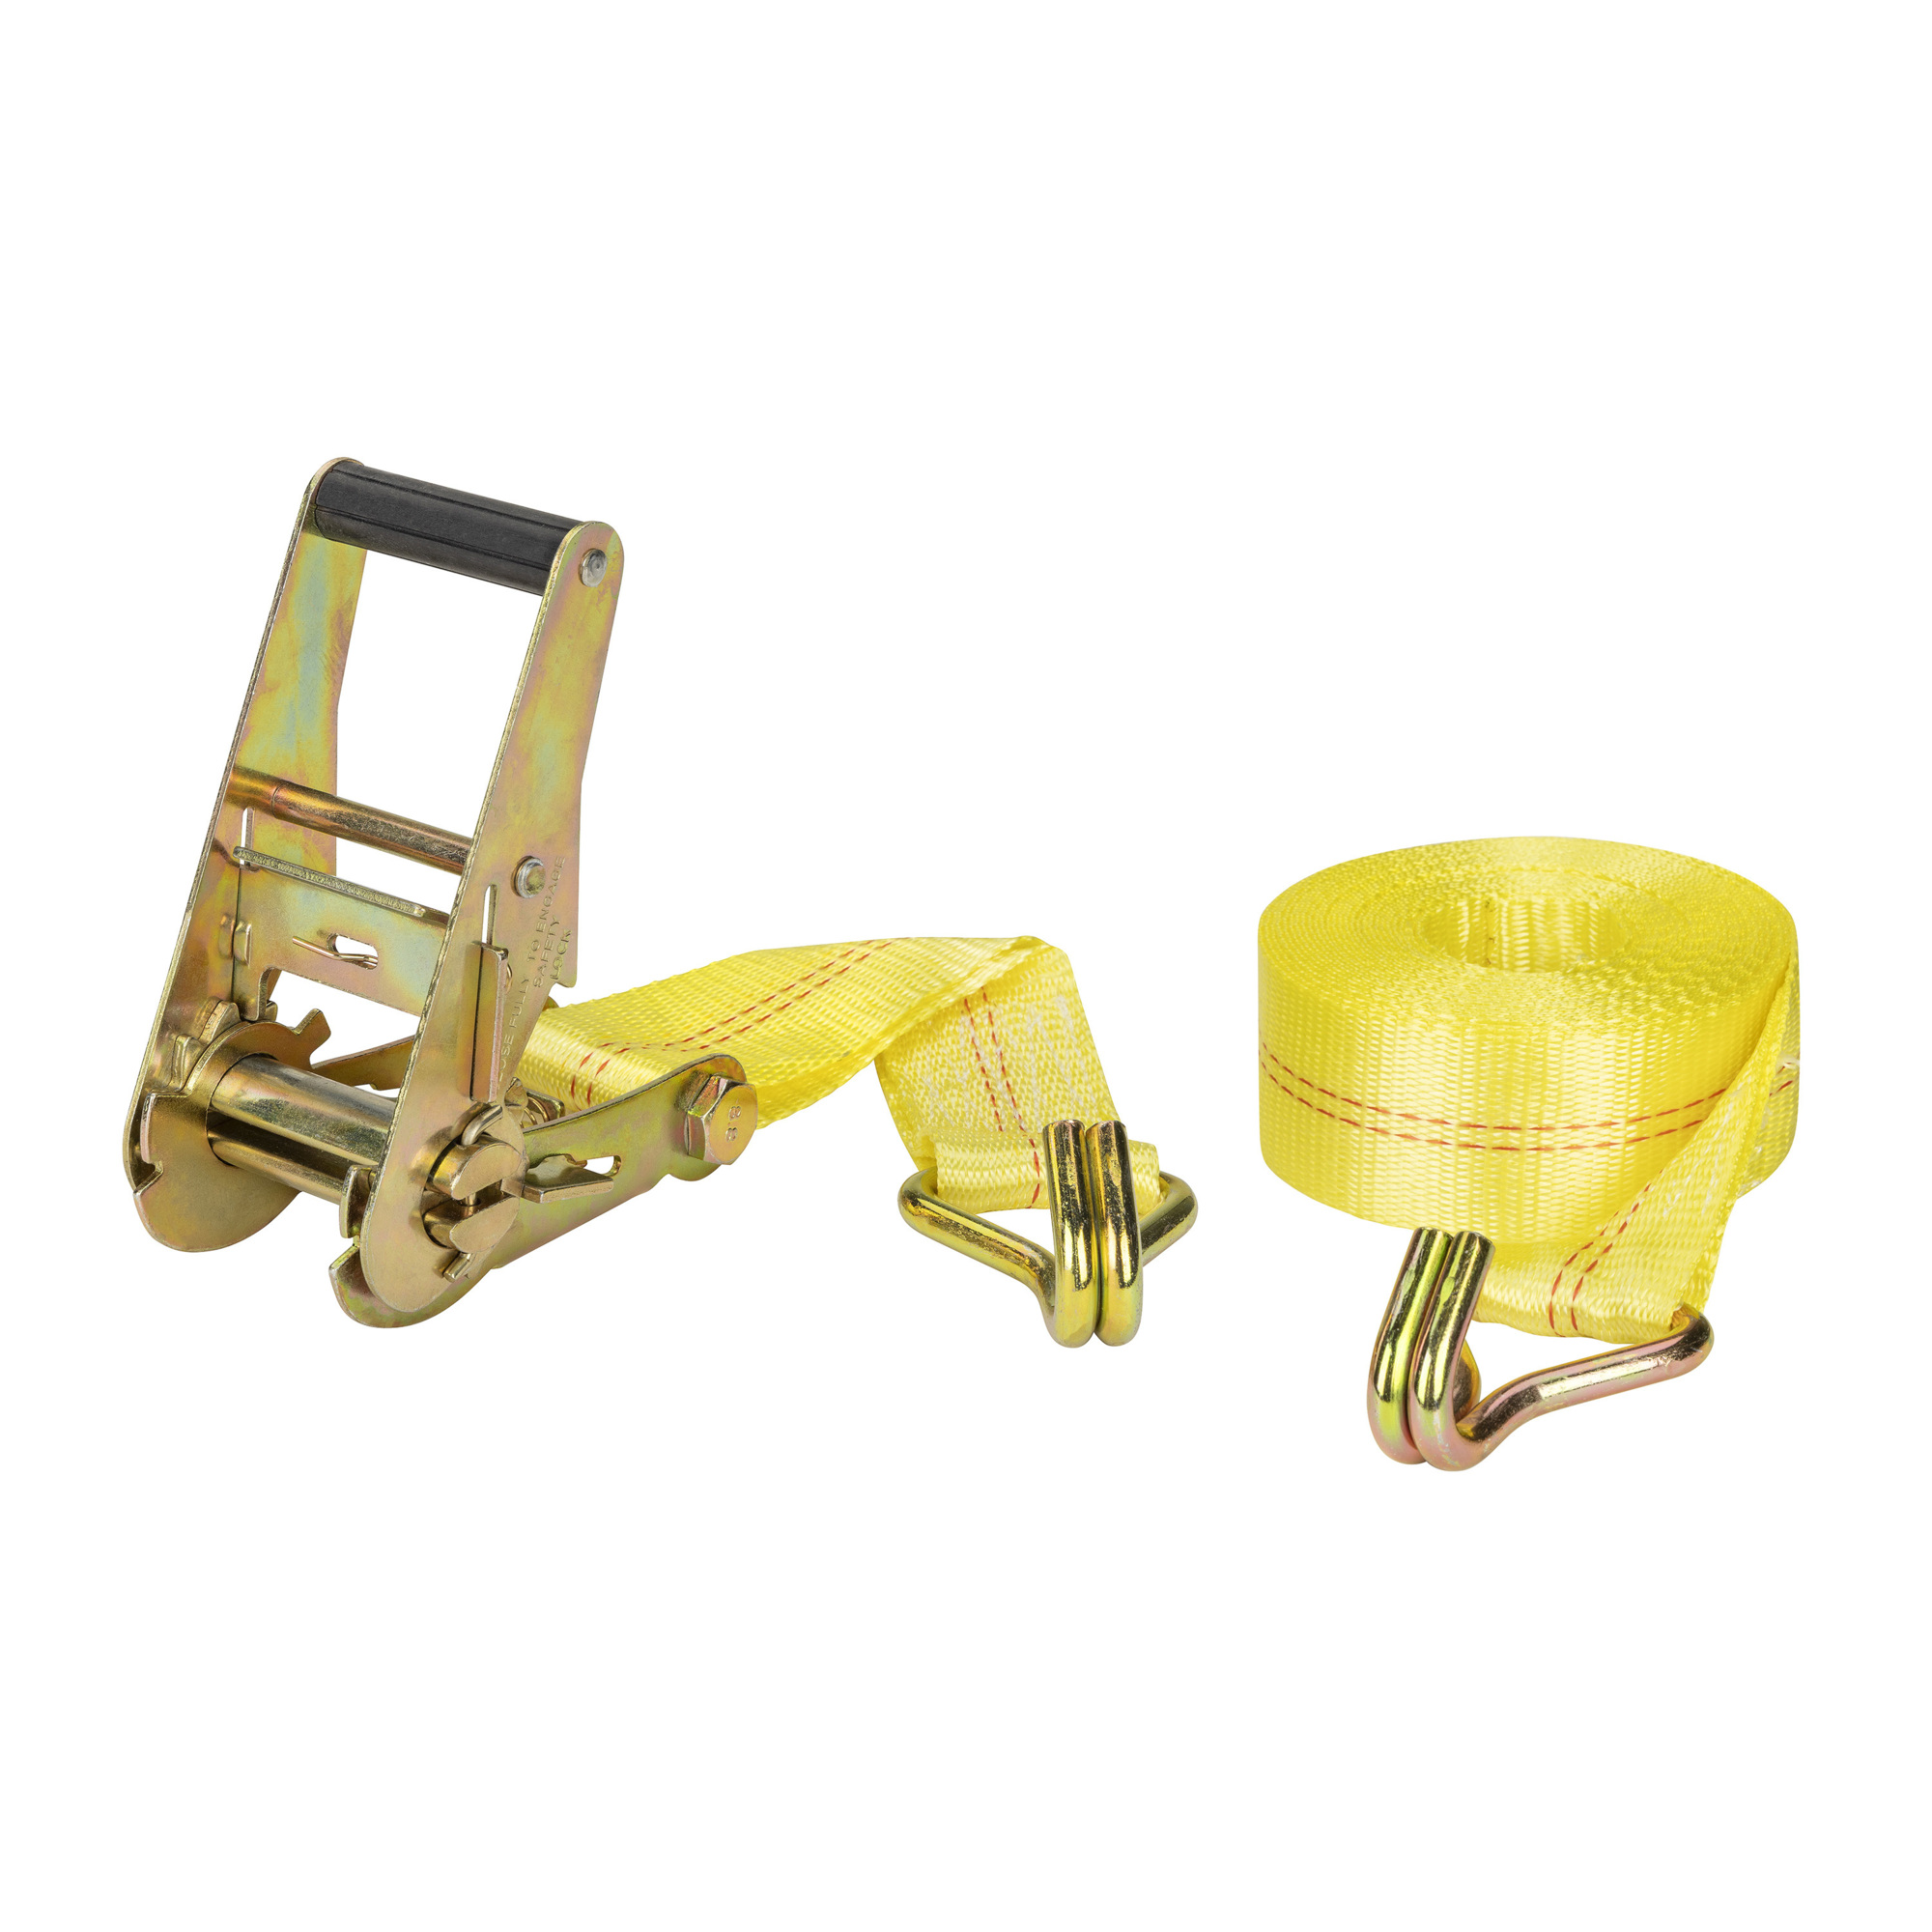 Ultra-Tow RatchetX 2Inch x 25ft. Tie-Down with Double J-Hooks, 1667-lb. Working Load, 5000-lb. Capacity, 25ft.L, Yellow Polyester, Model 9302